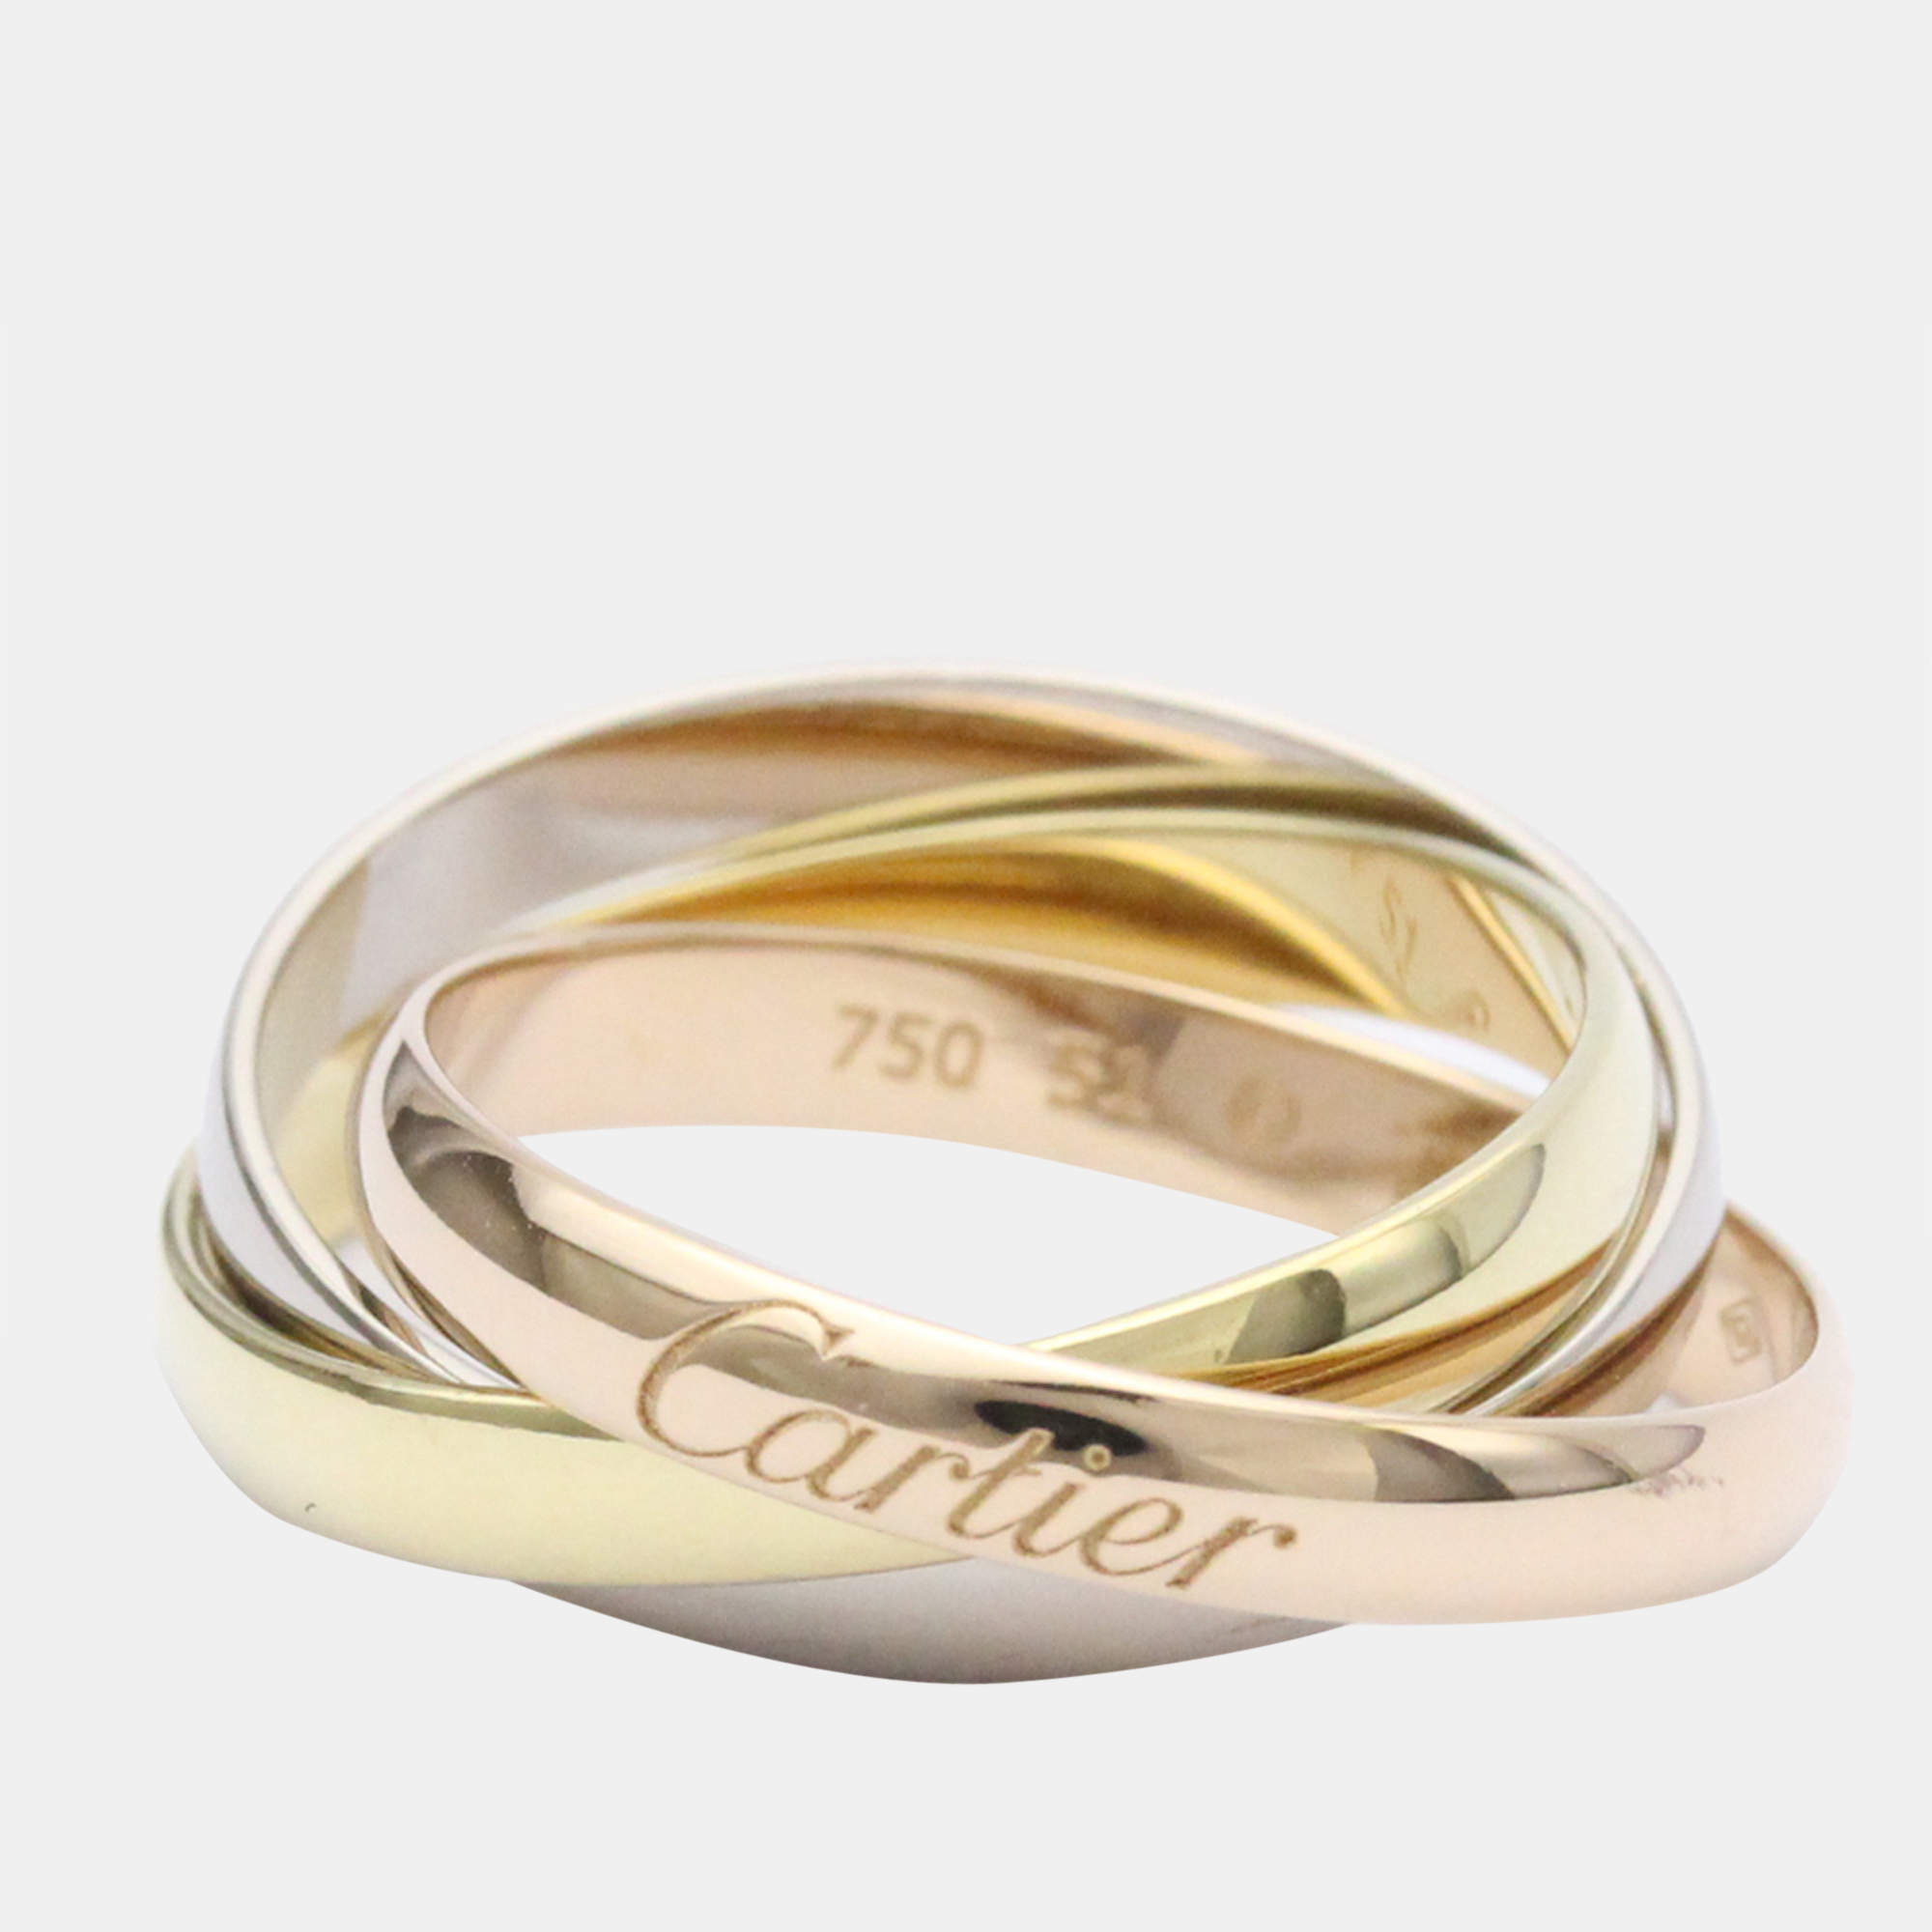 Cartier Trinity 18K Yellow Rose and White Gold Ring EU 51